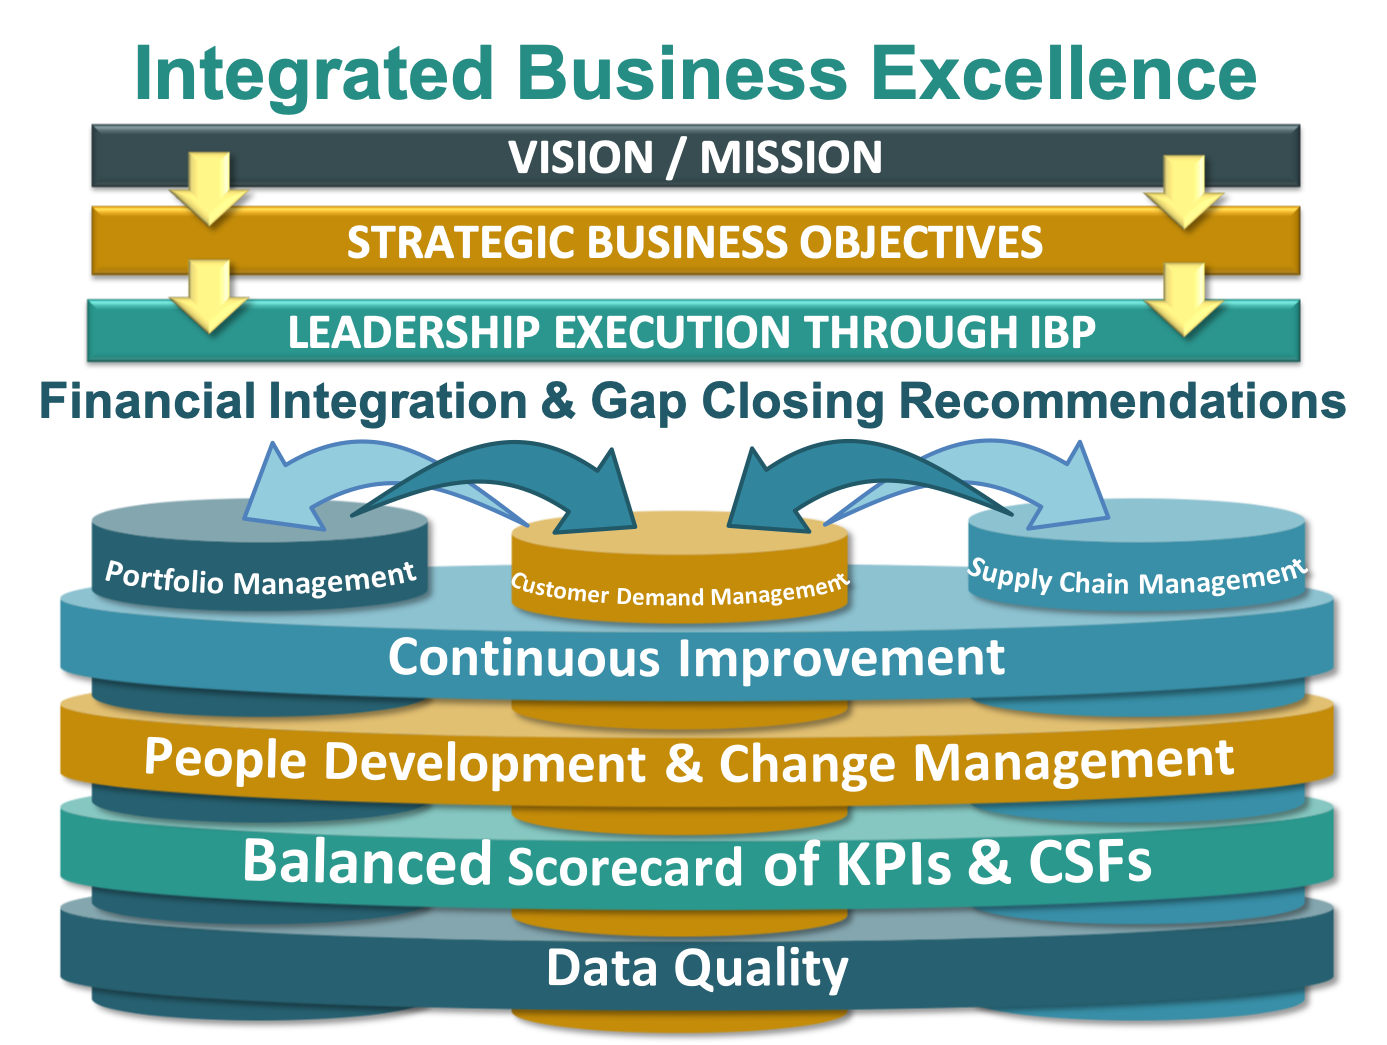 best integrated business planning